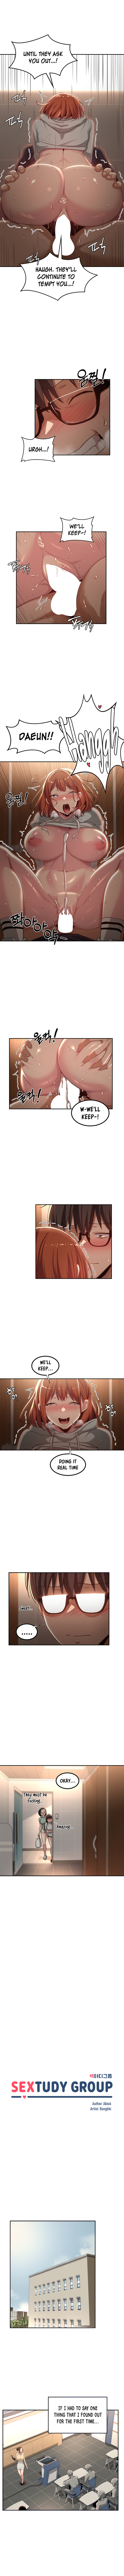 Panel Image 1 for chapter 63 of manhwa Sex Study Group on read.oppai.stream